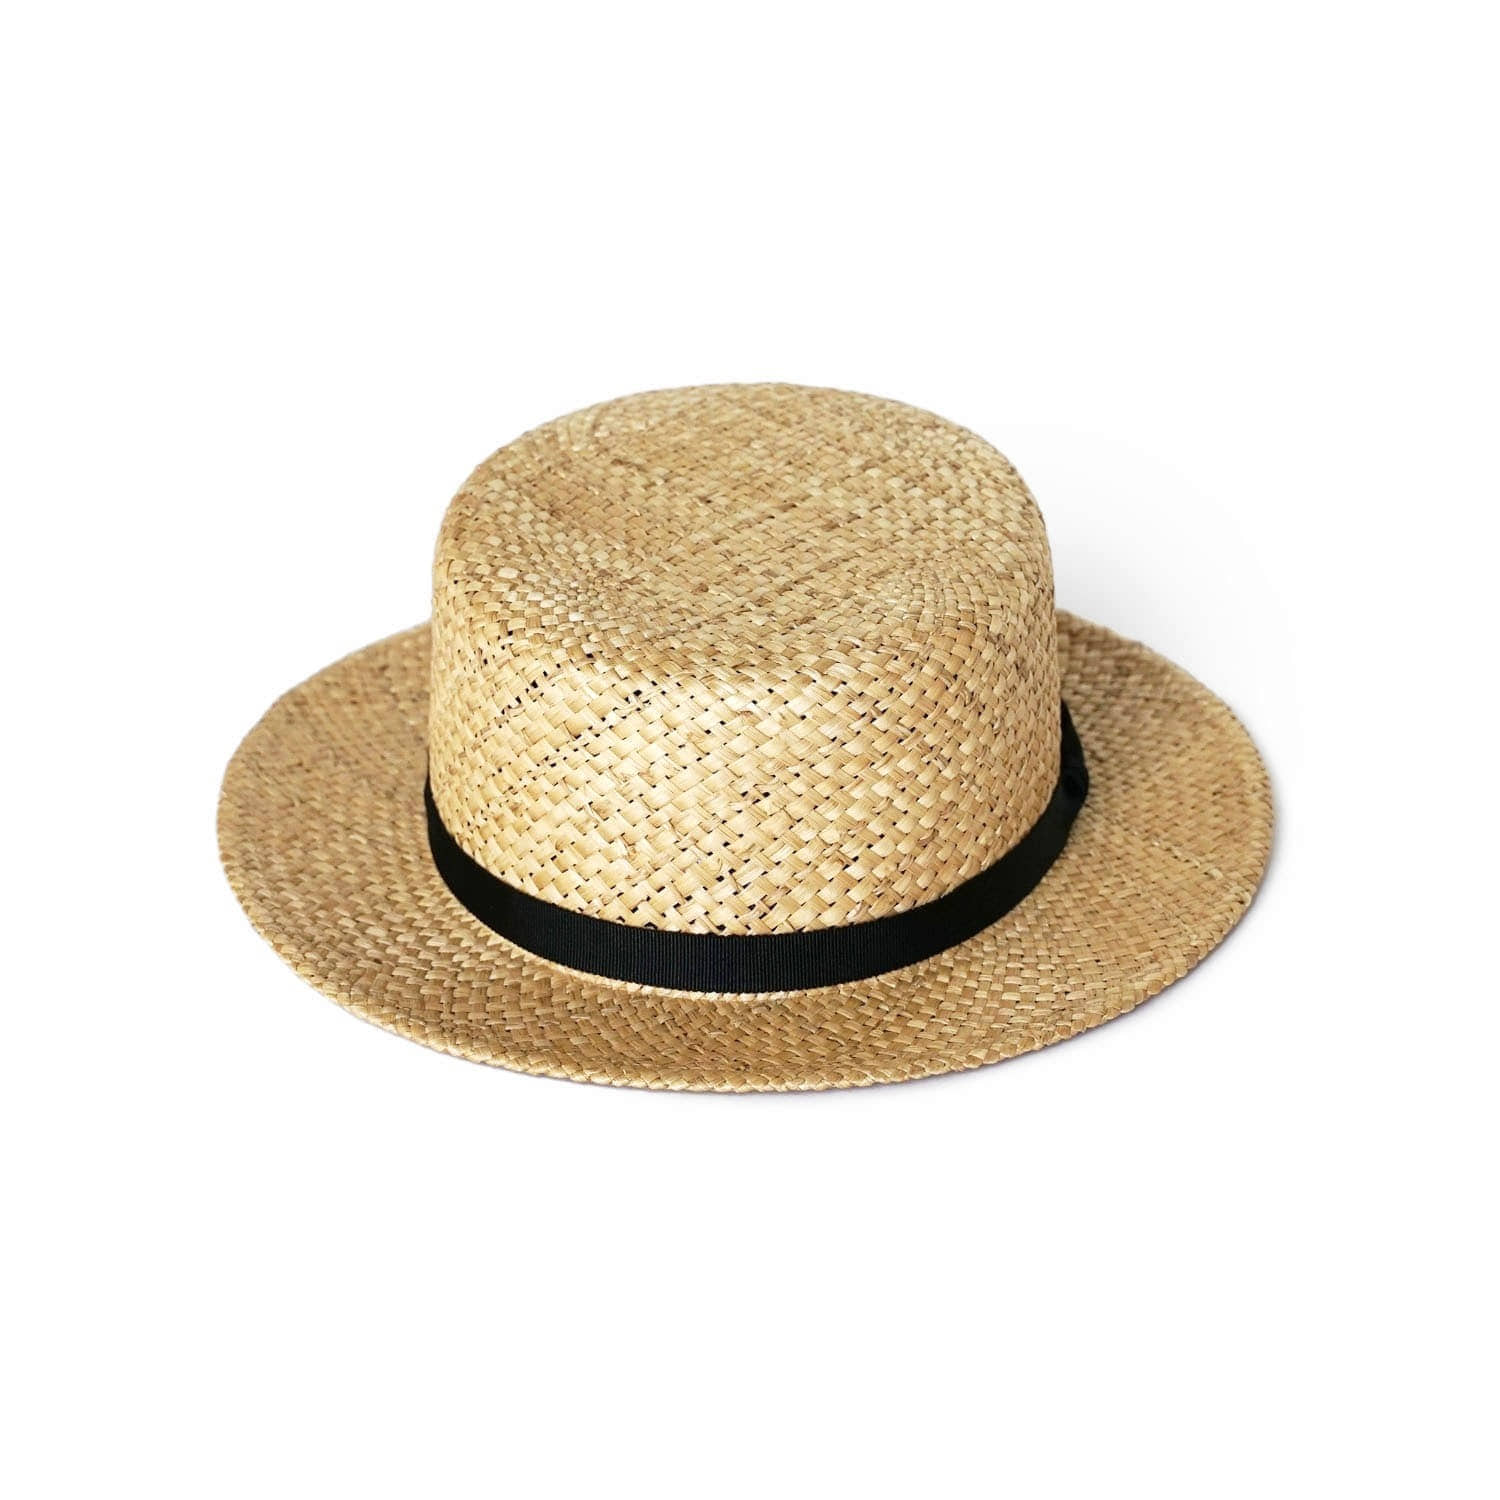 ﻿Straw Boater Hat